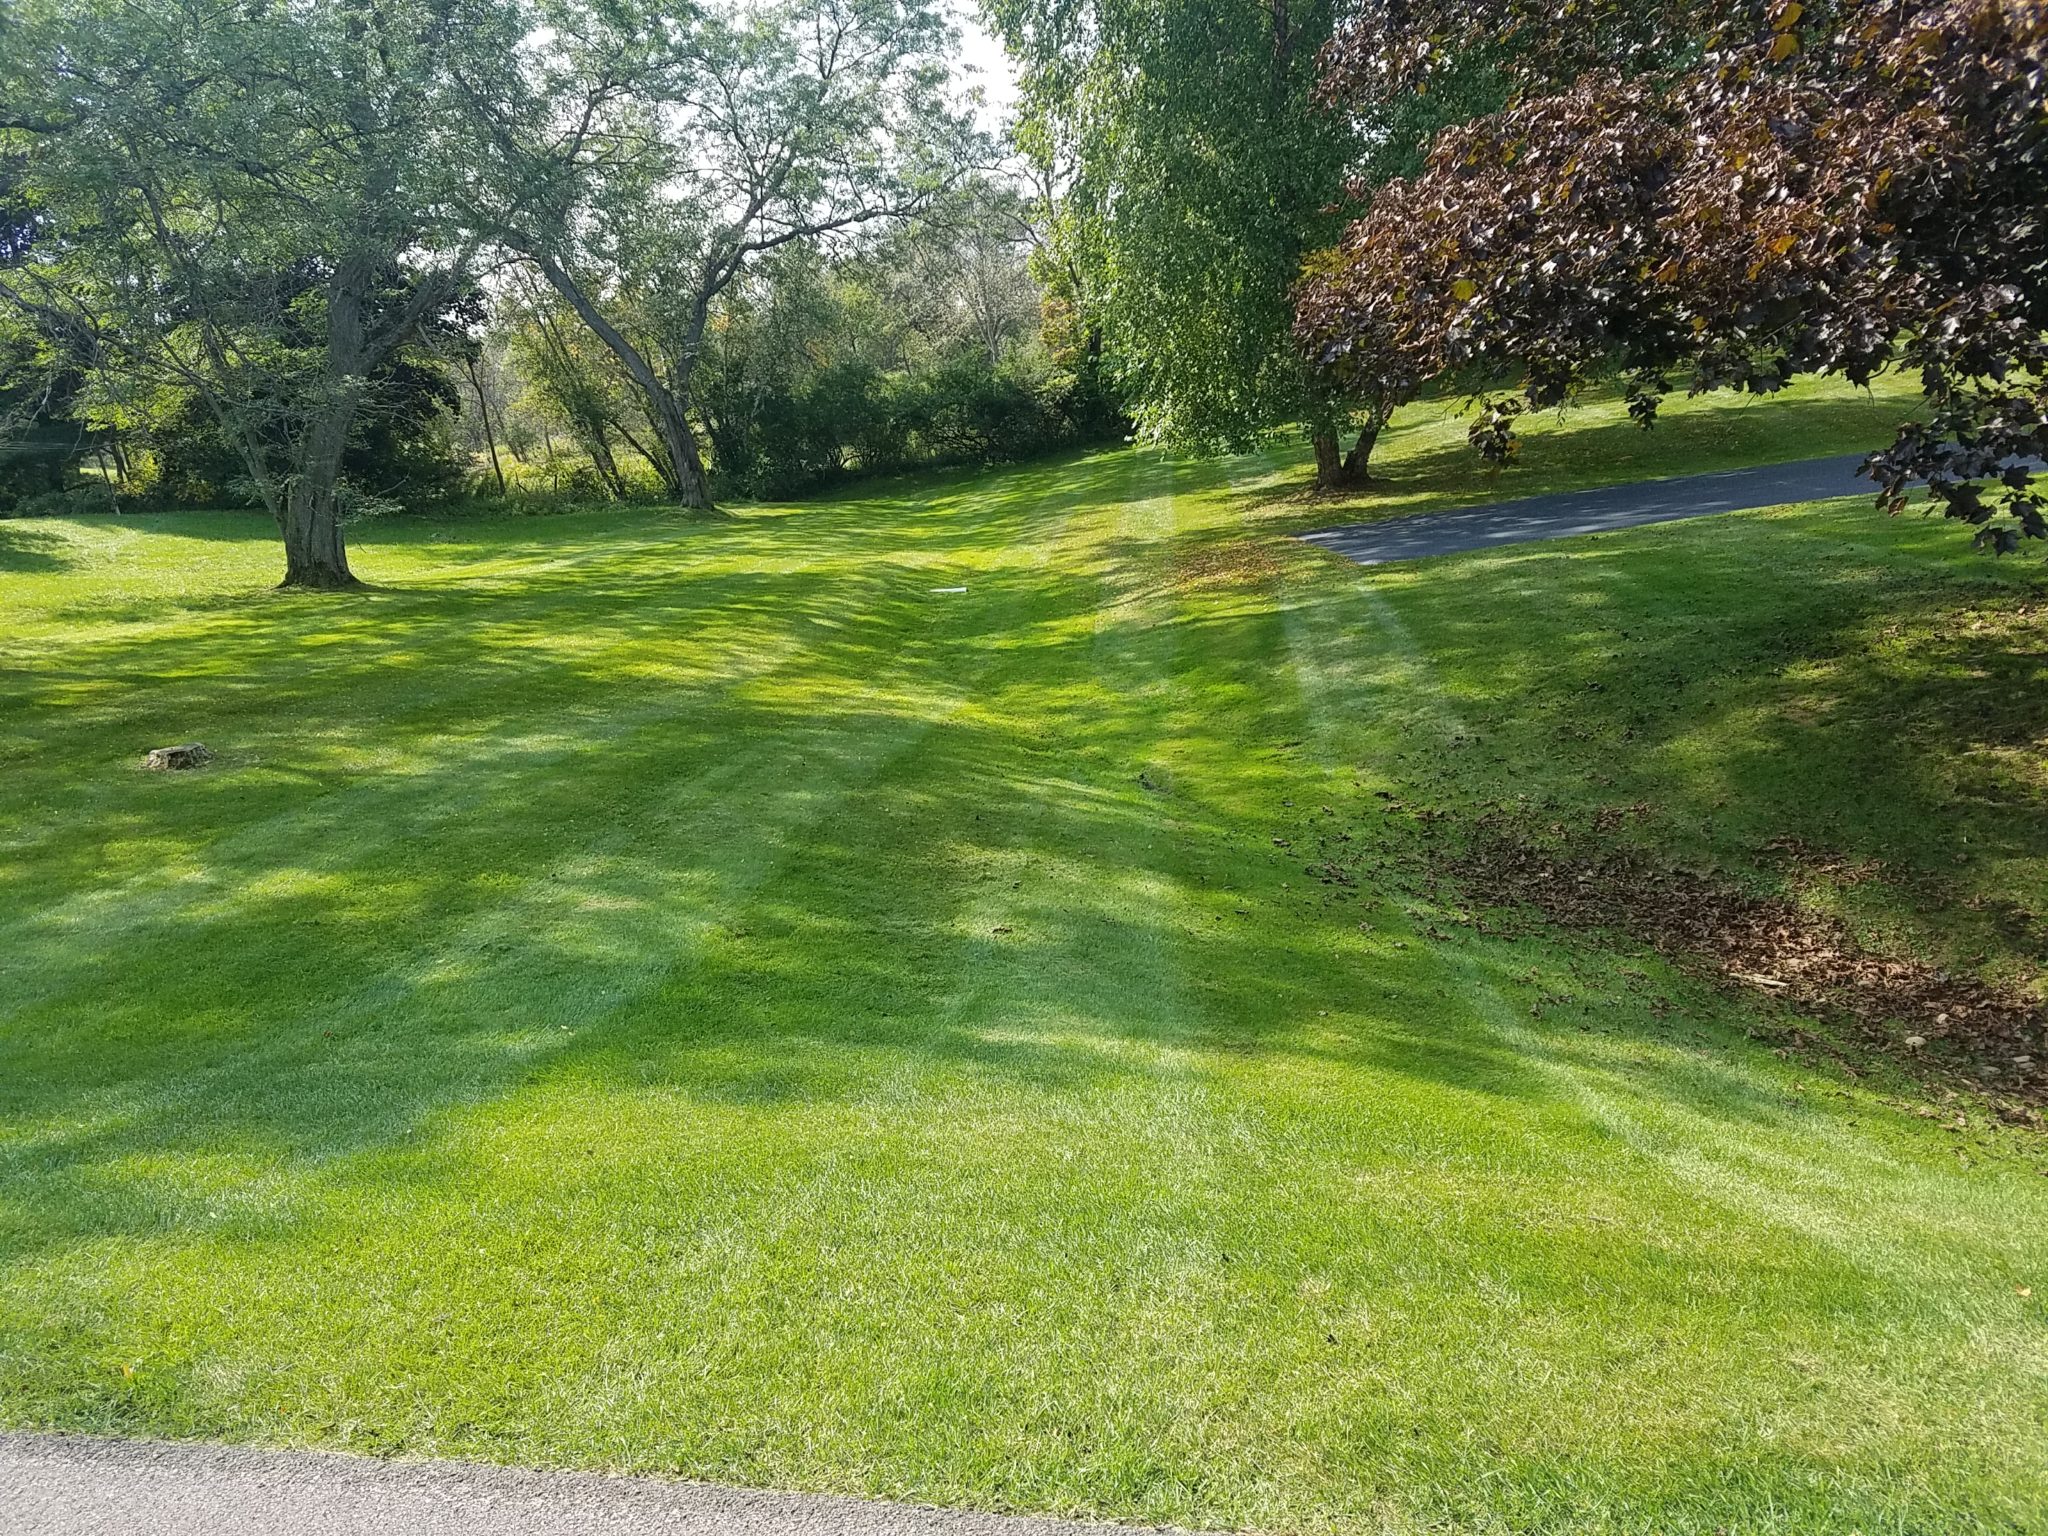 Grassmaster Landscaping Lawn Maintenance Projects